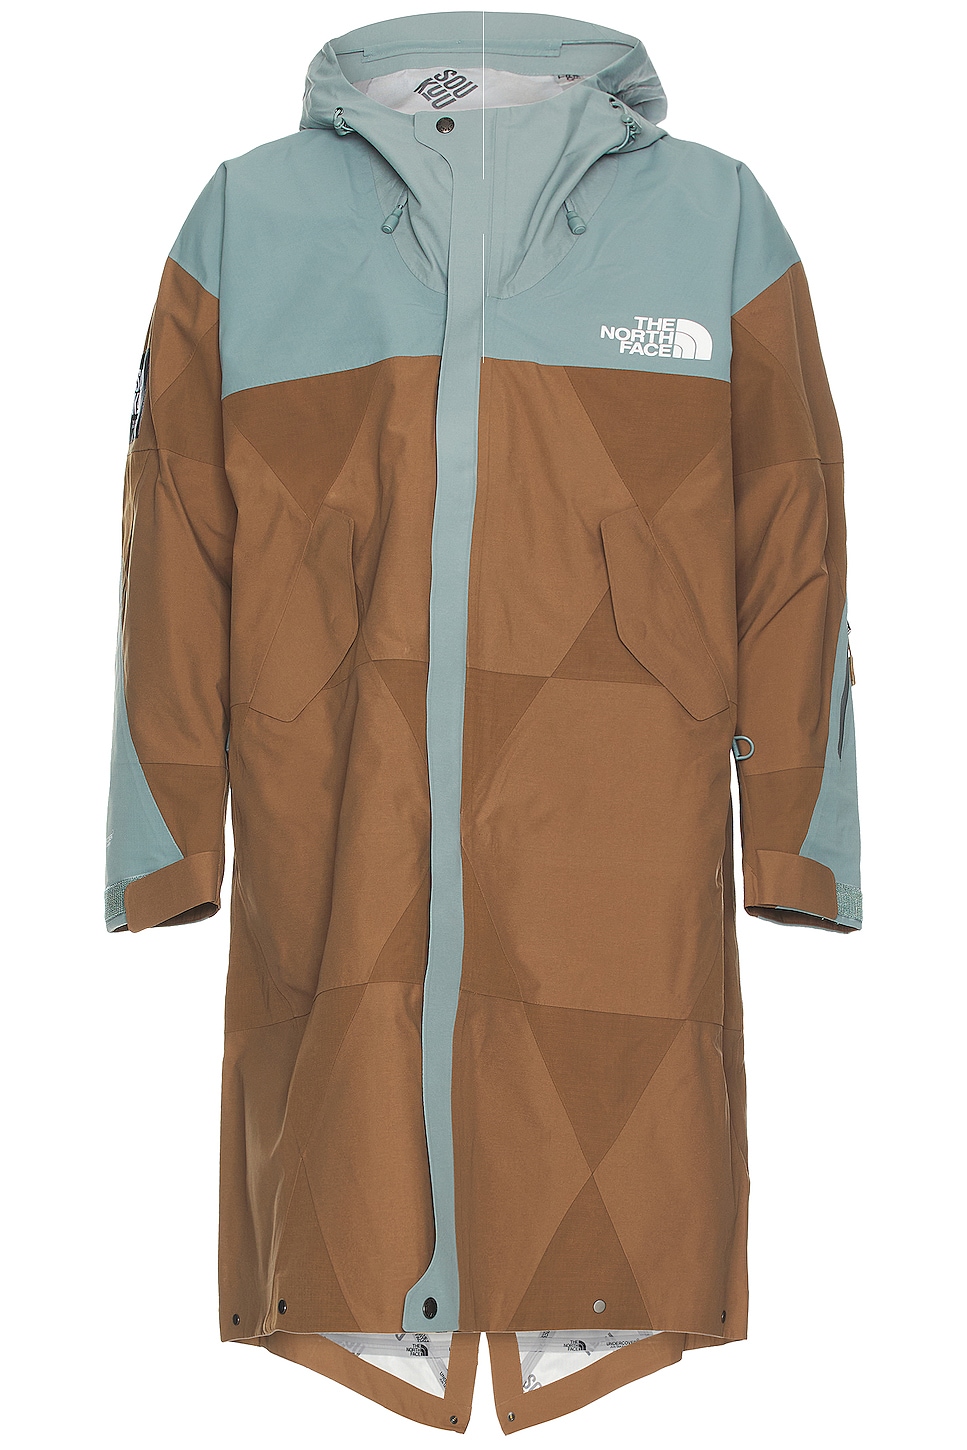 Image 1 of The North Face X Project U Geodesic Shell Jacket in Concrete Grey & Sepia Brown